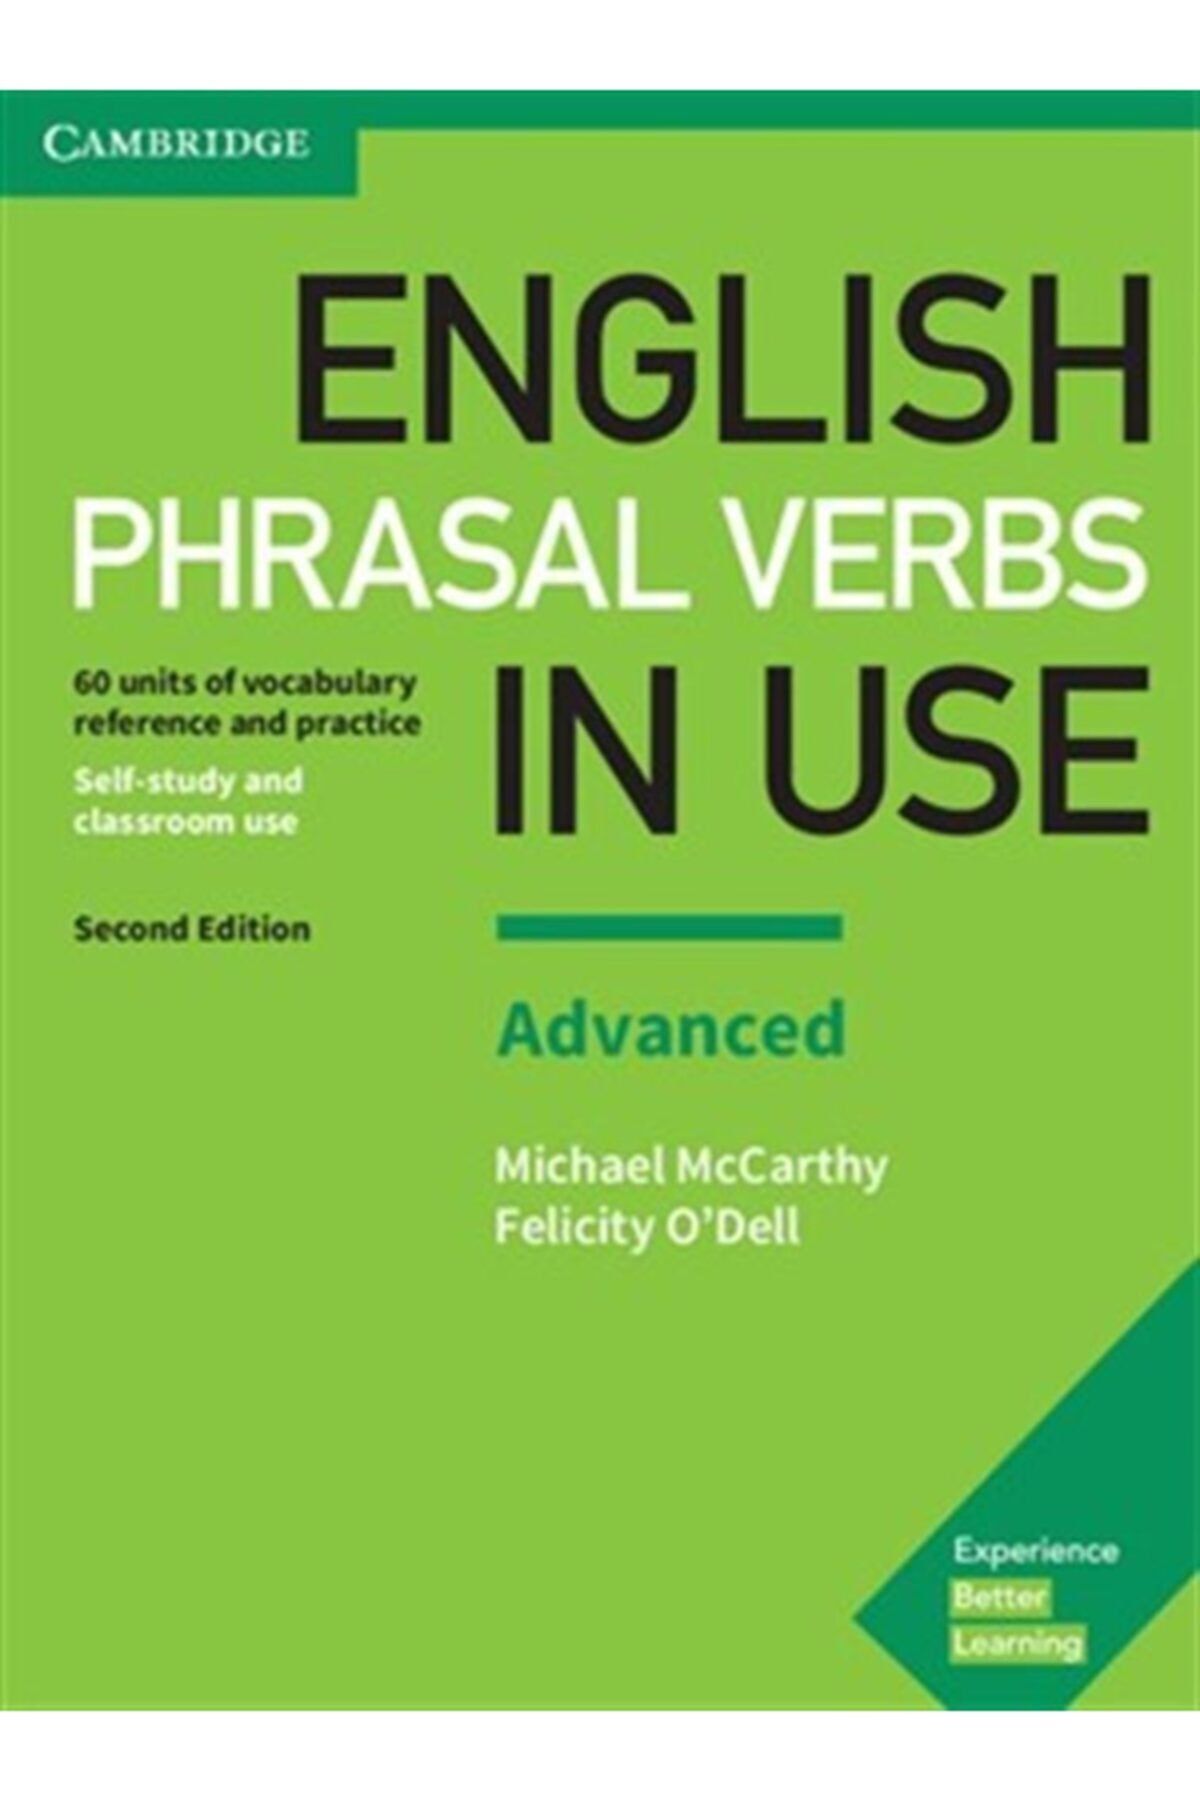 Book　Phrasal　English　Advanced　Cambridge　With　In　Use　University　Trendyol　Verbs　Answers